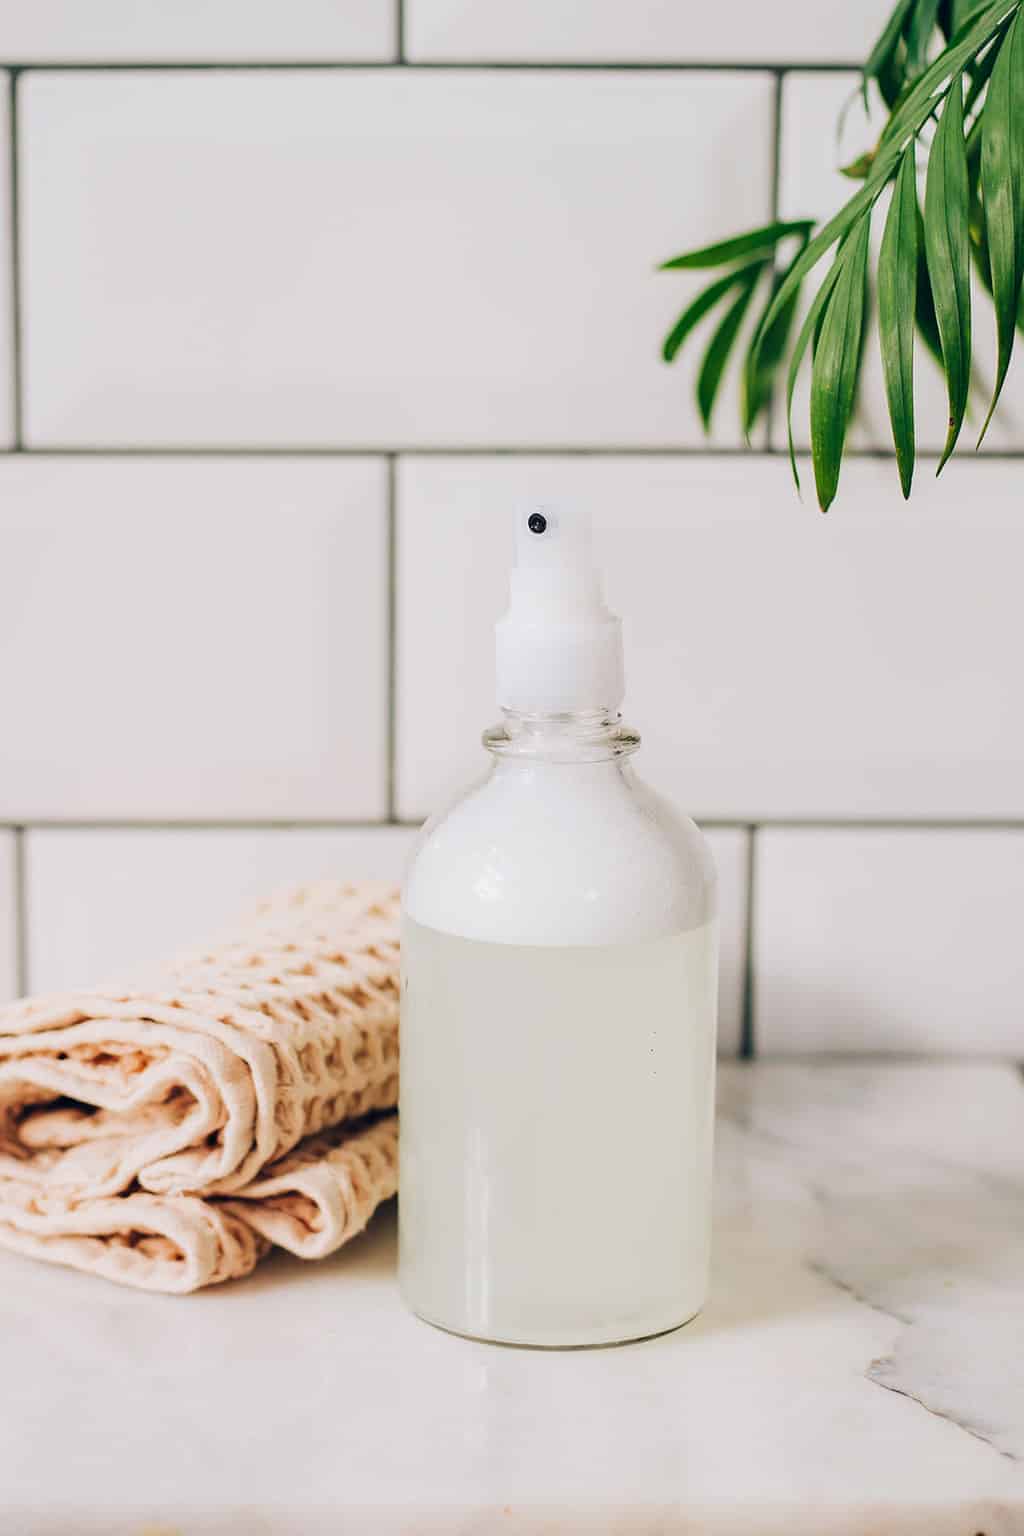 Shower Cleaner Spray Recipe for Soap Buildup and Mildew